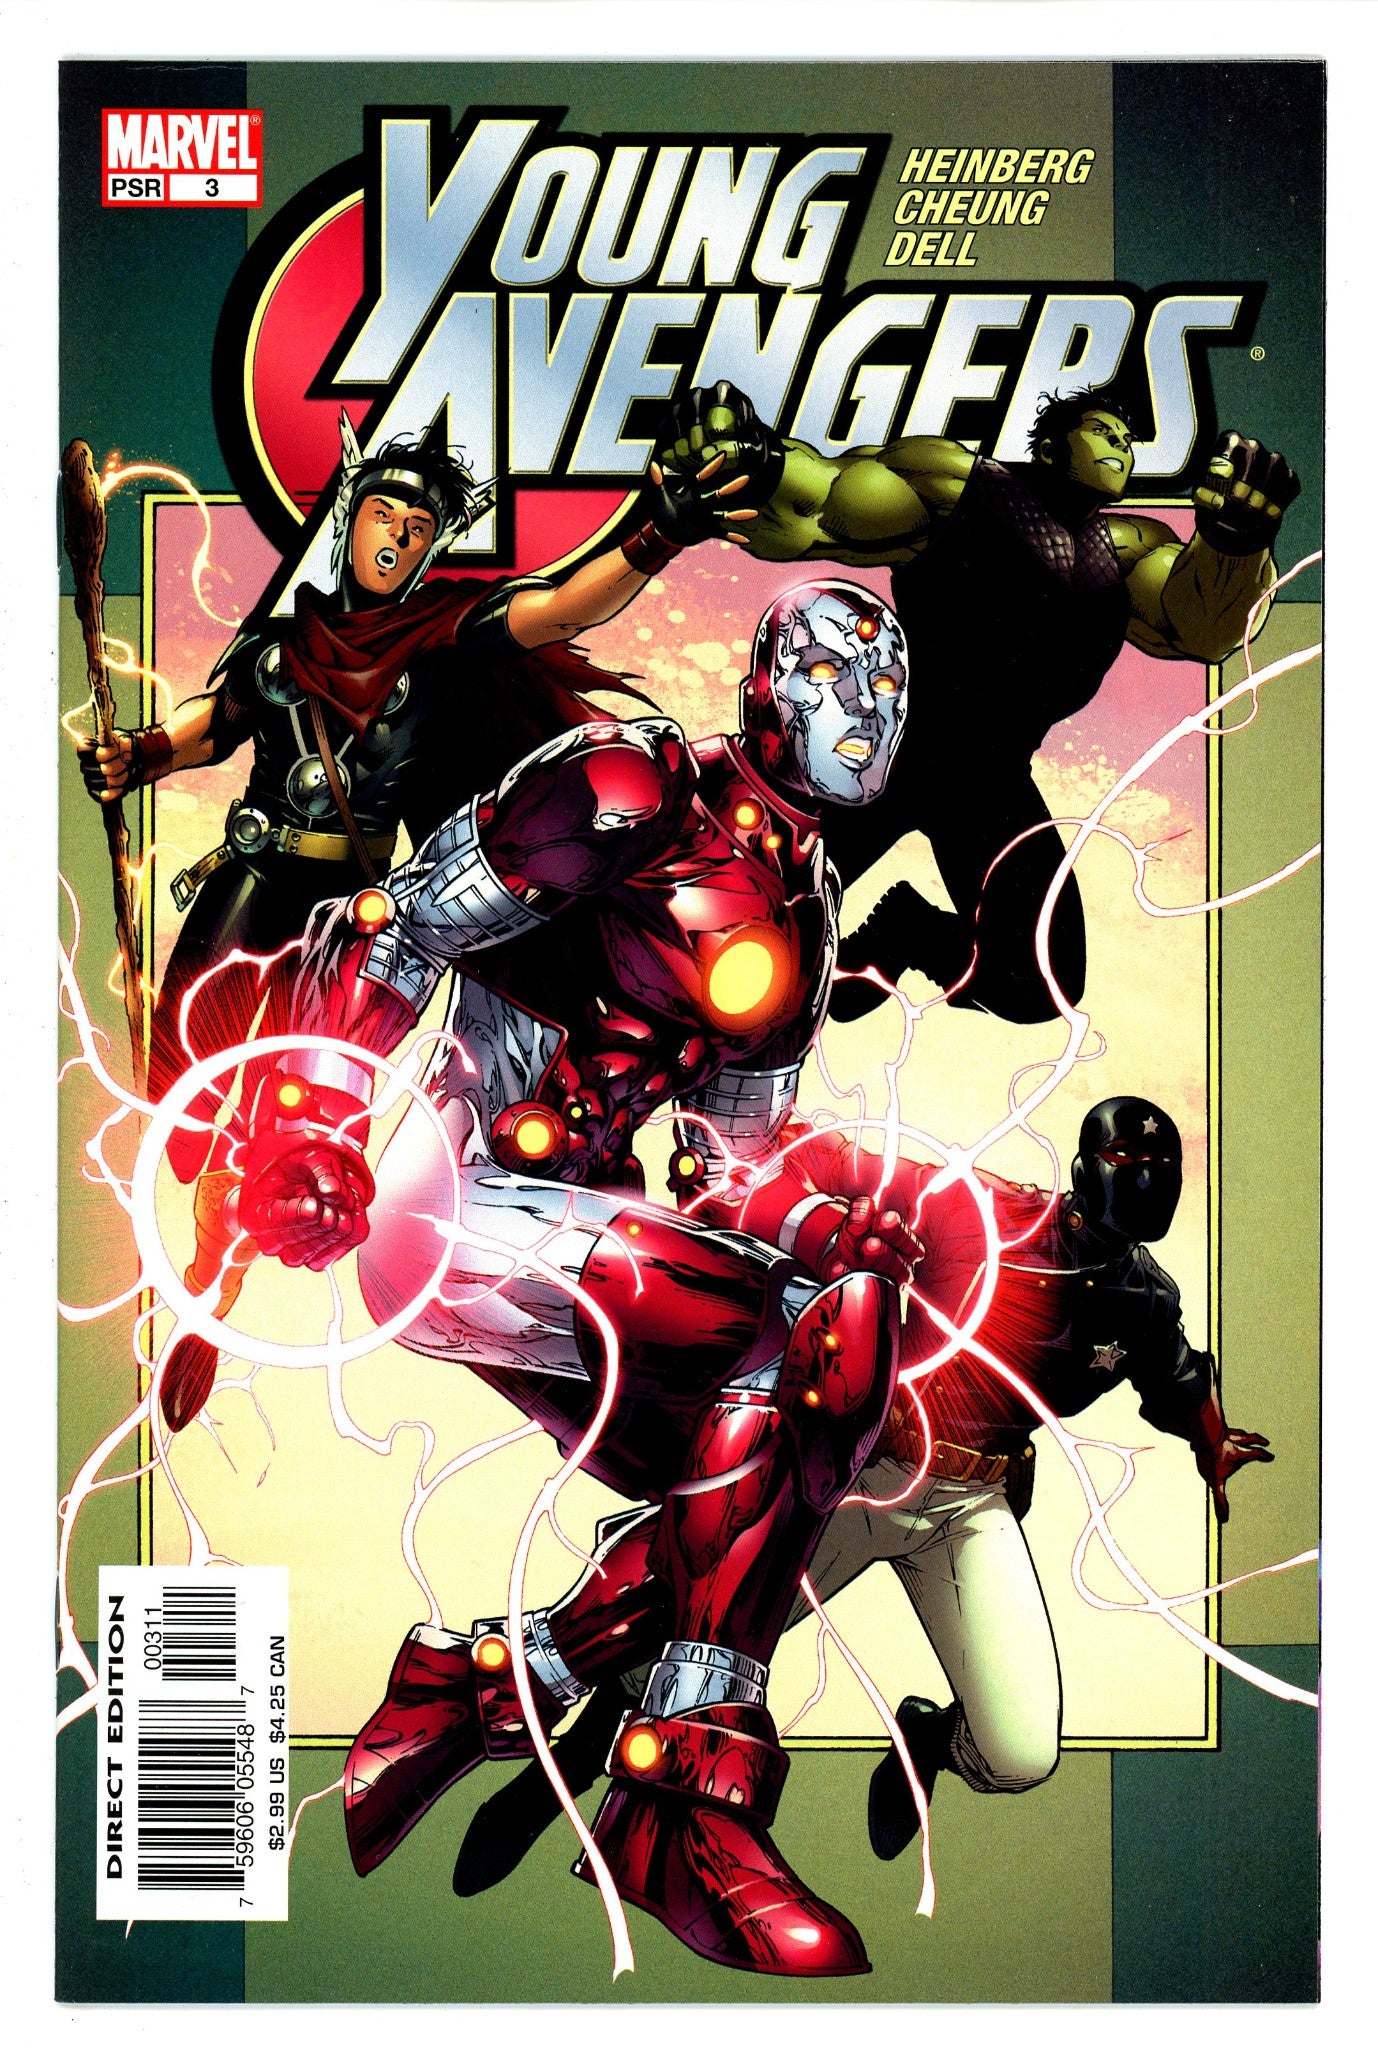 Young Avengers Vol 1 3 NM-